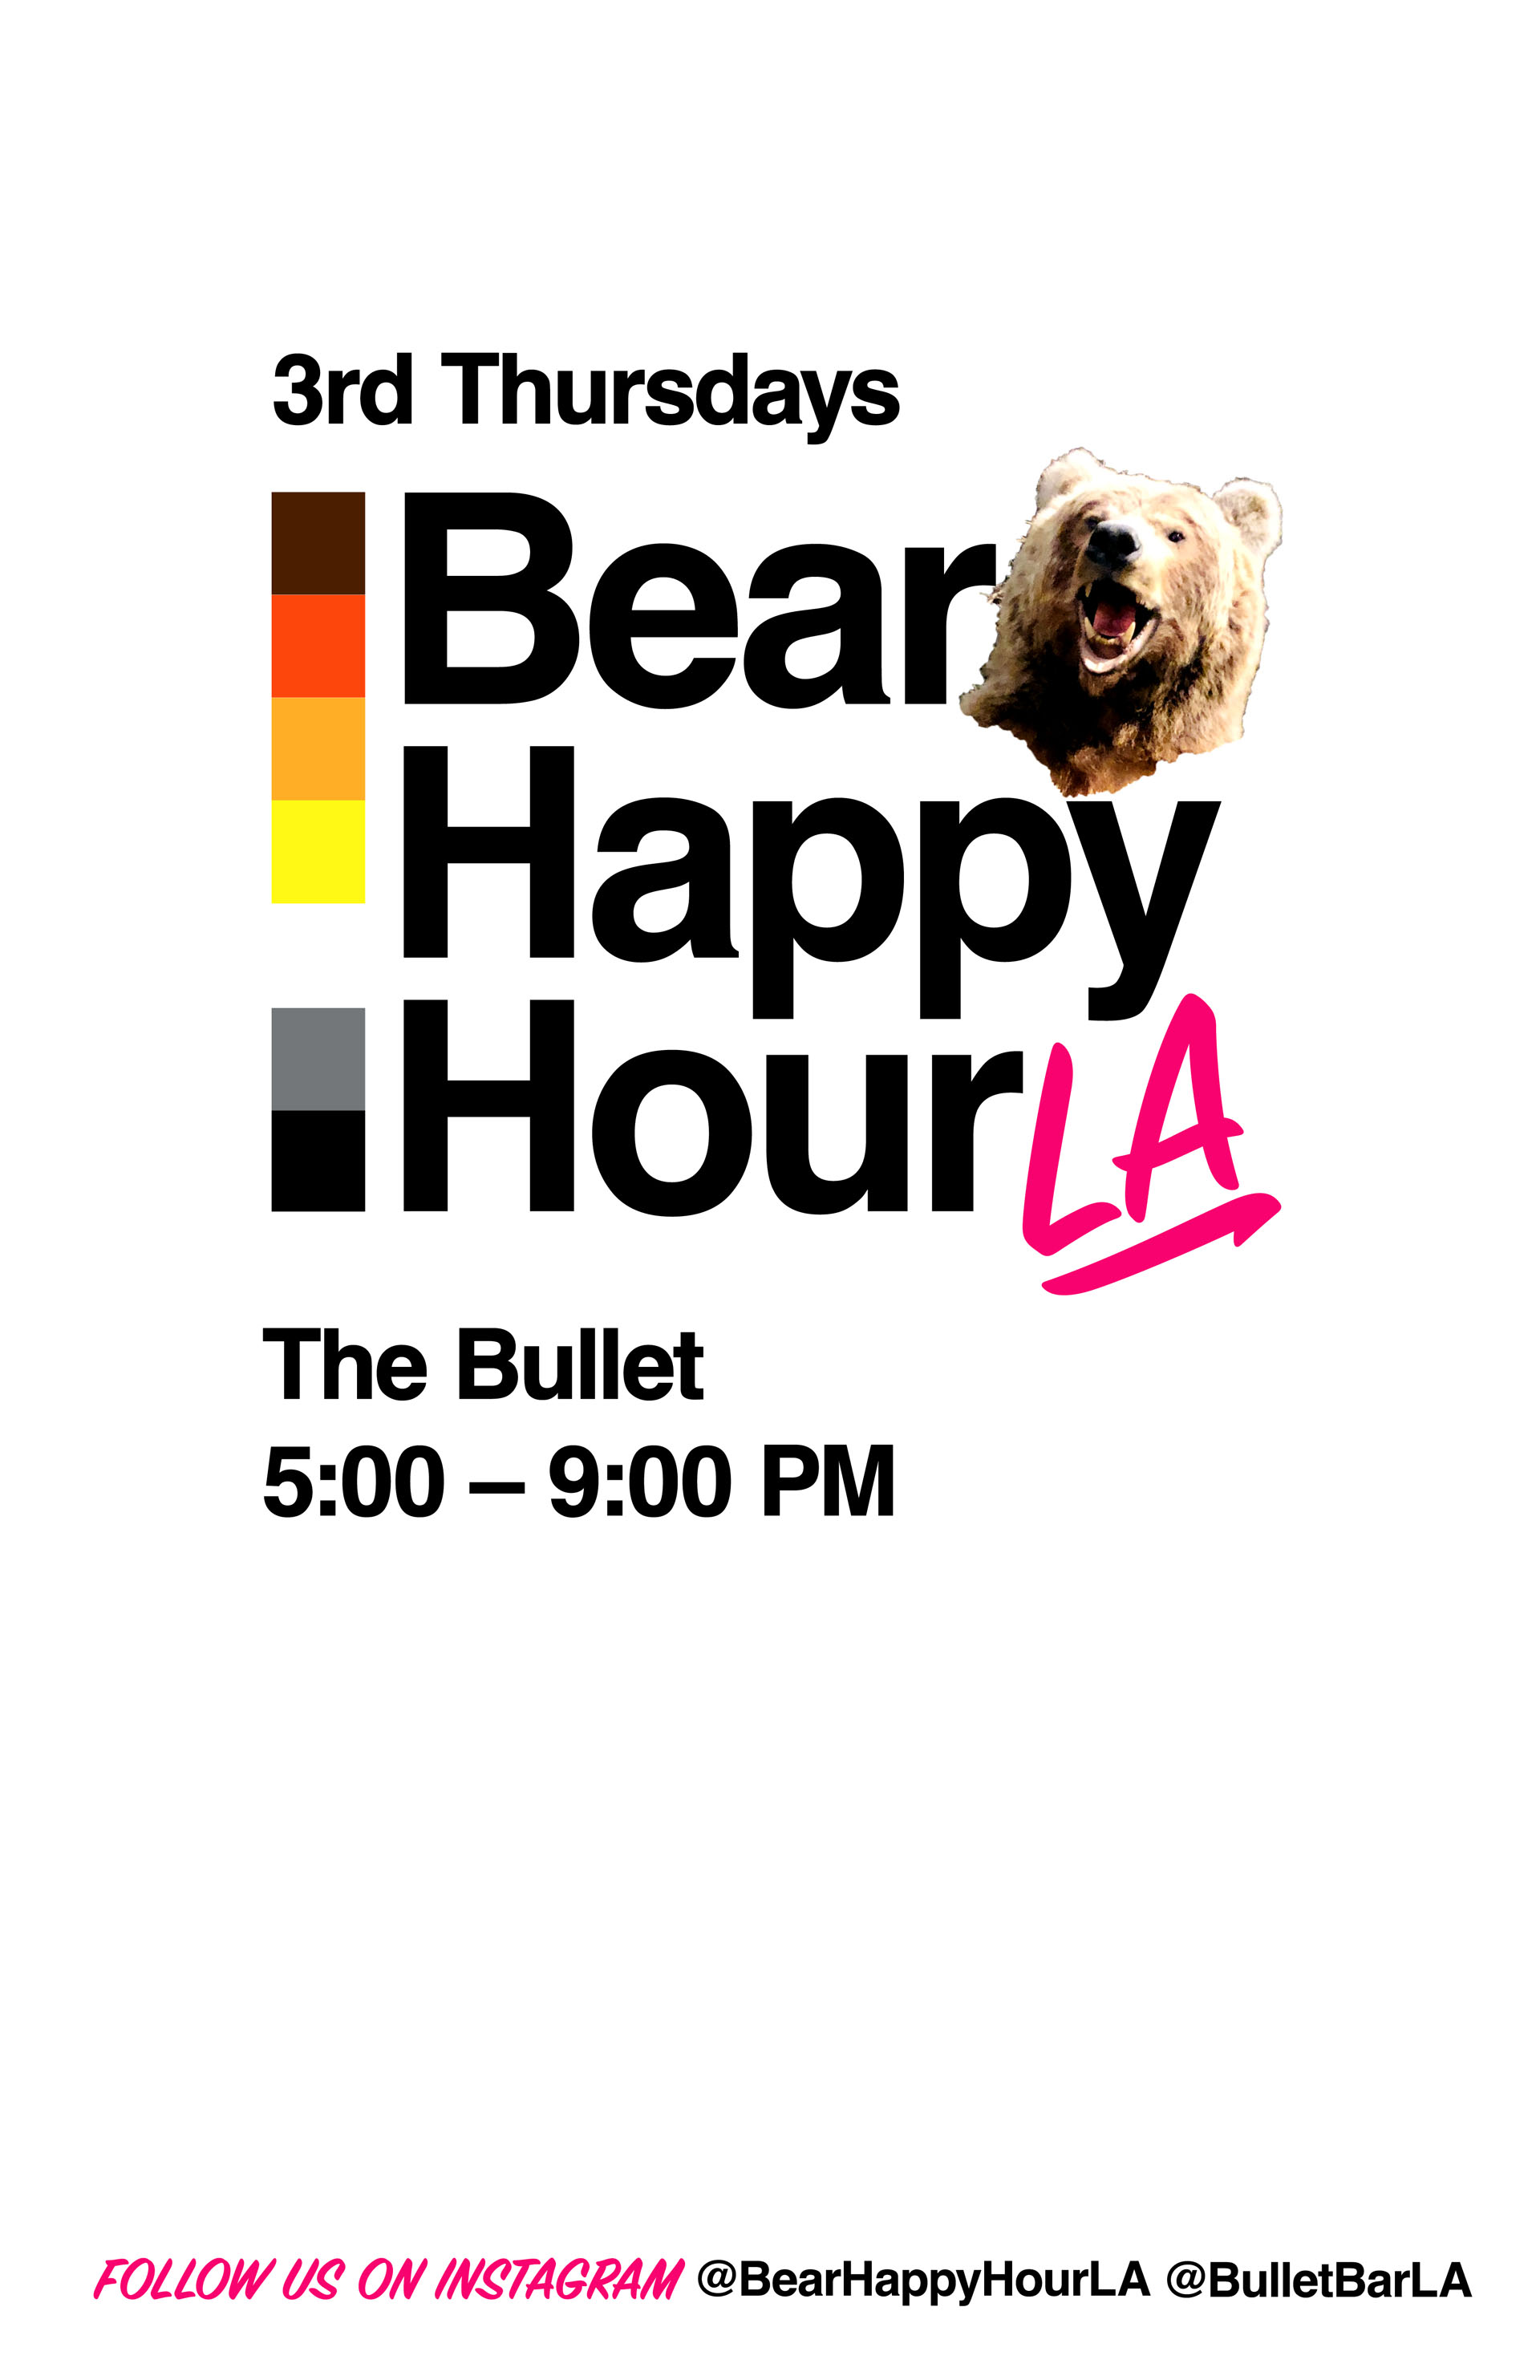 THE BULLET BAR Presents BEAR HAPPY HOUR LA: The 3rd Thursday of the month, 5:00 PM to 9:00 PM.